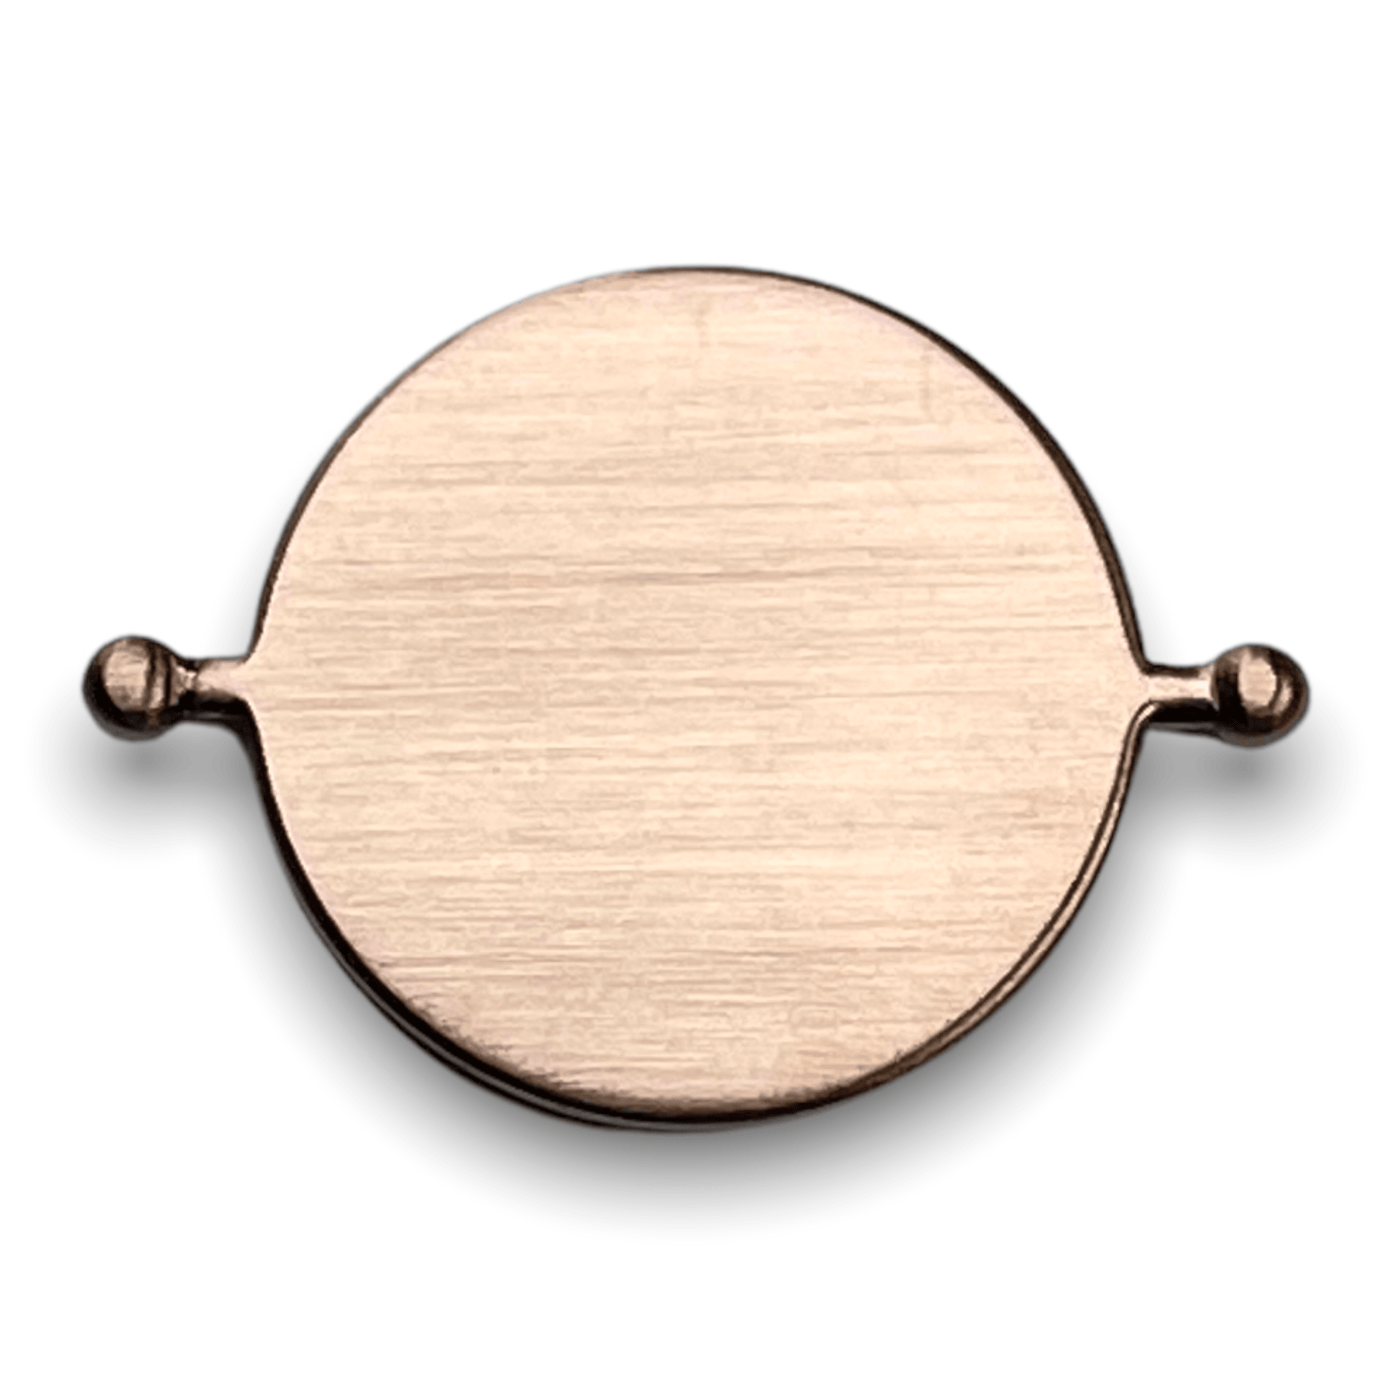 Circle-Shaped Solid Spinner